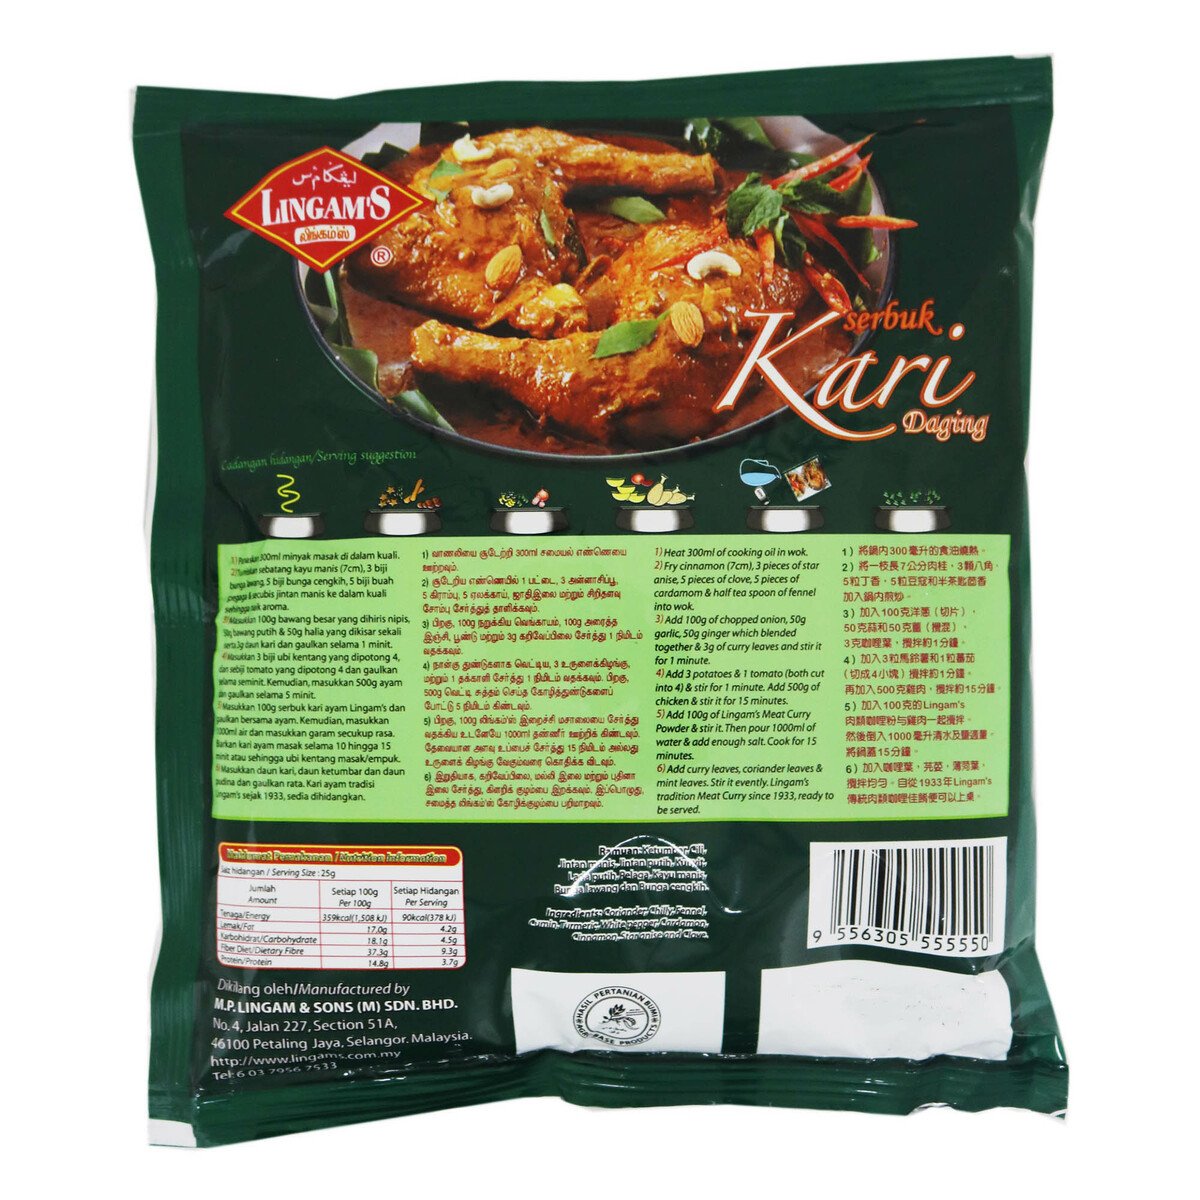 Lingams Meatcurry Powder 250g